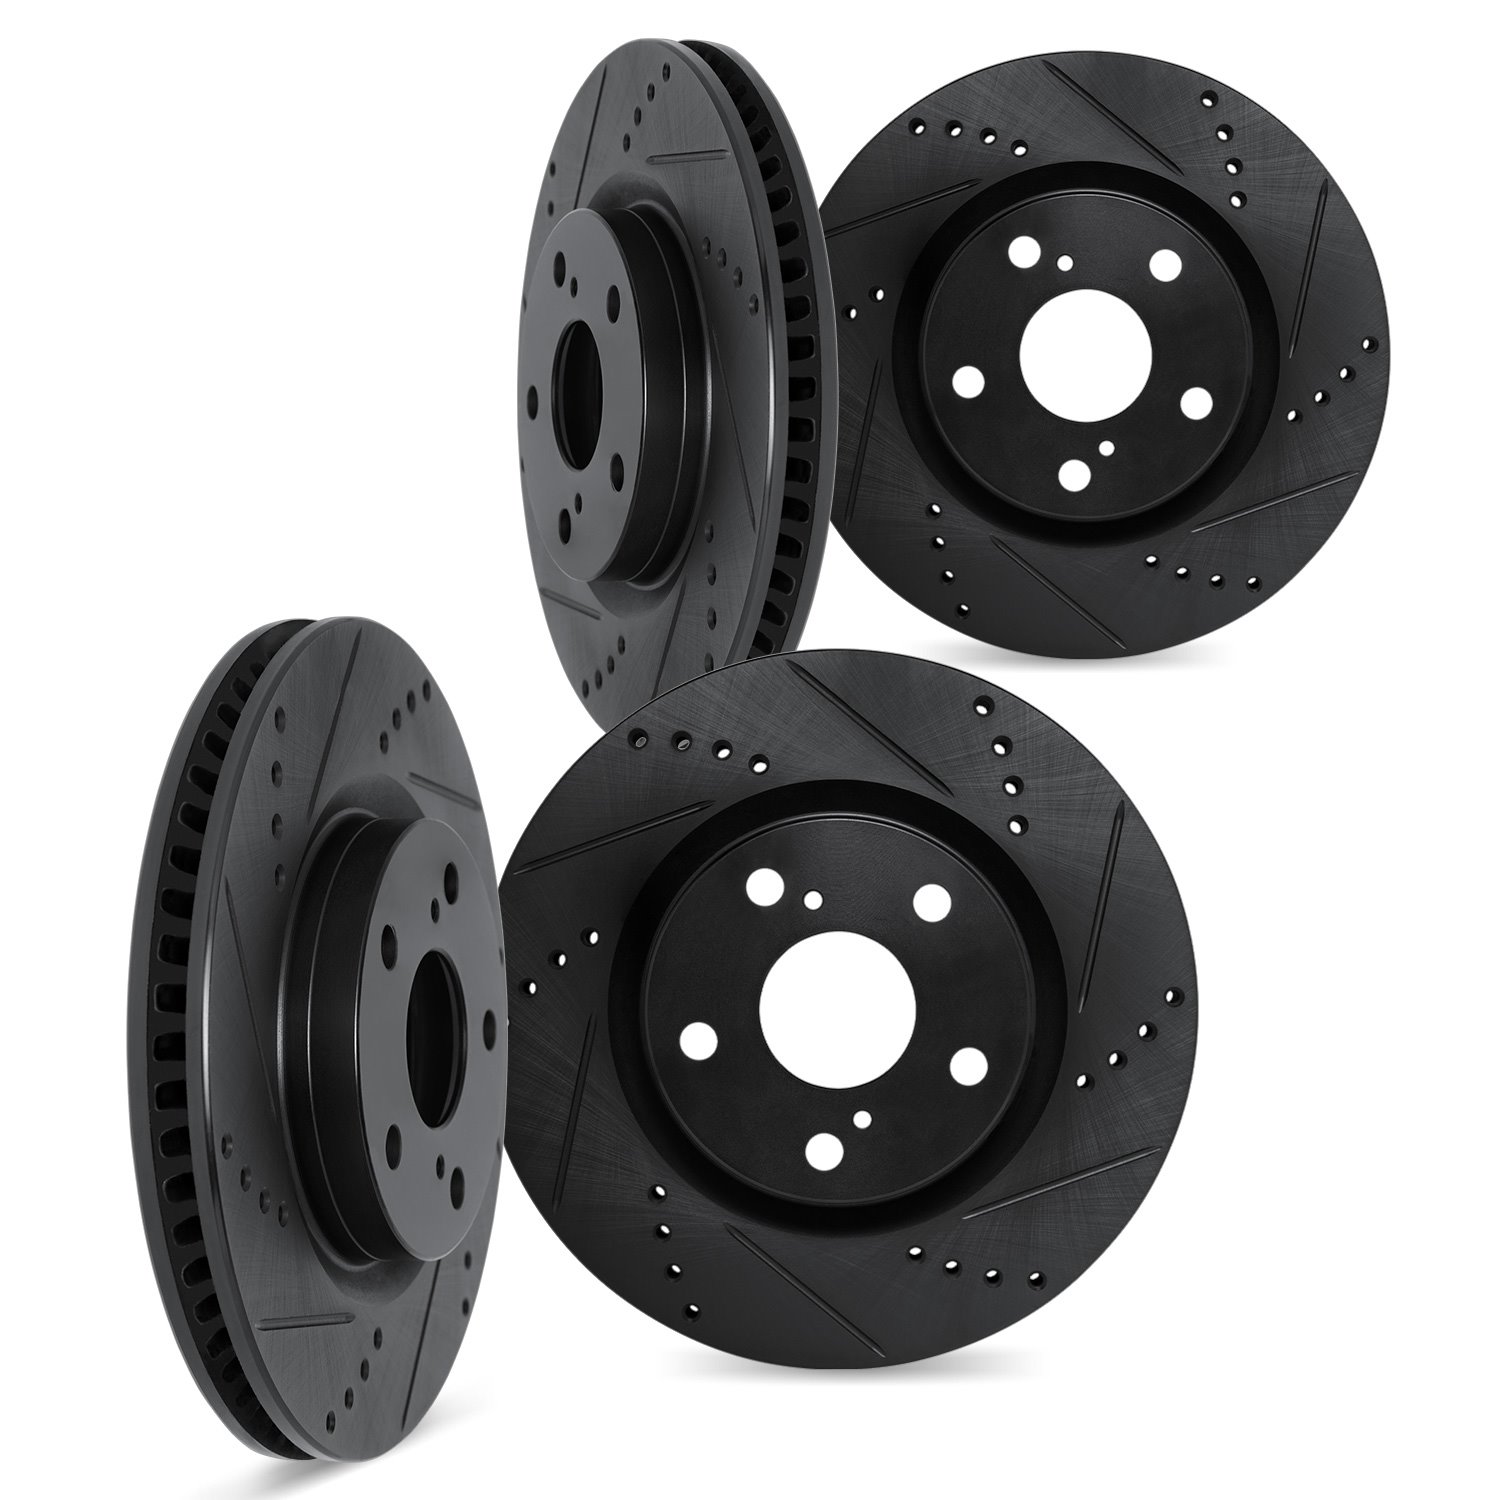 8004-13015 Drilled/Slotted Brake Rotors [Black], Fits Select Subaru, Position: Front and Rear